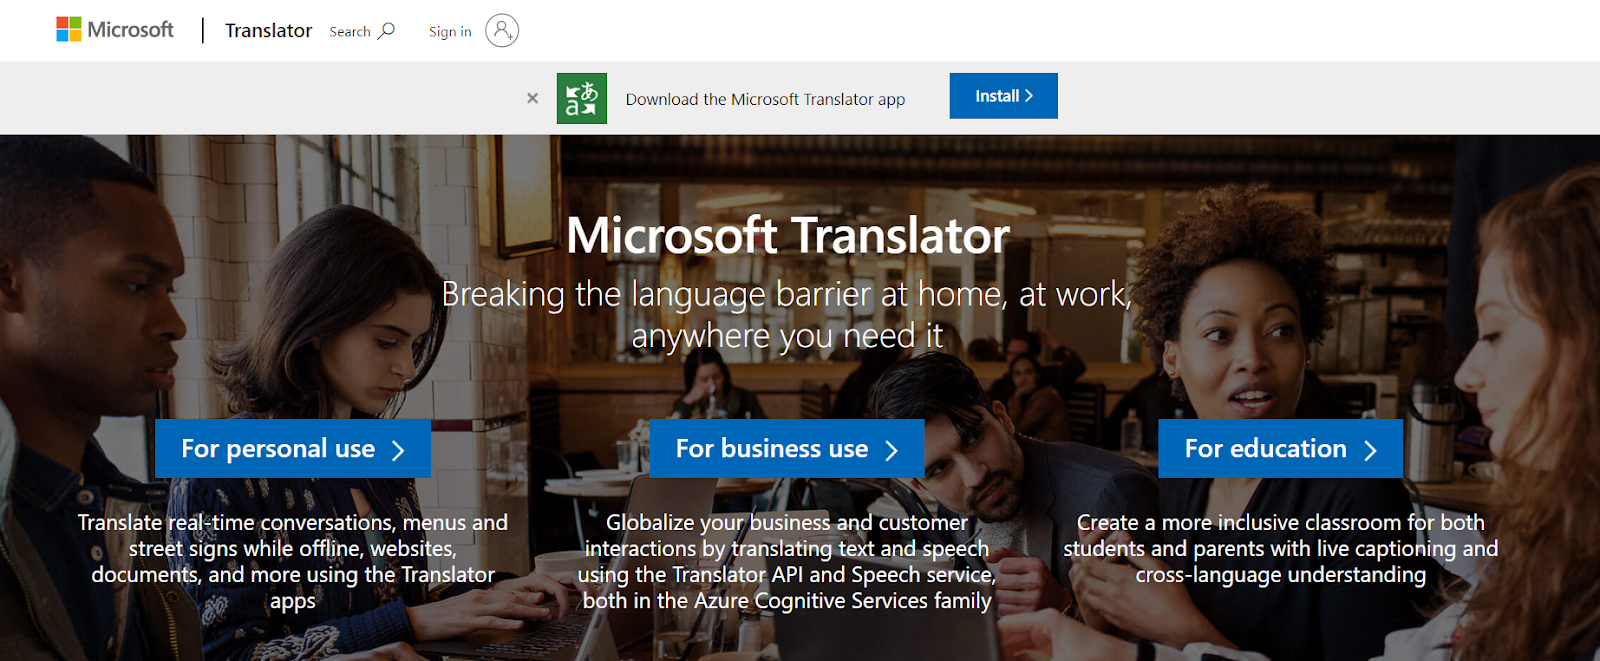 Bing Translate, also known as Microsoft Translate